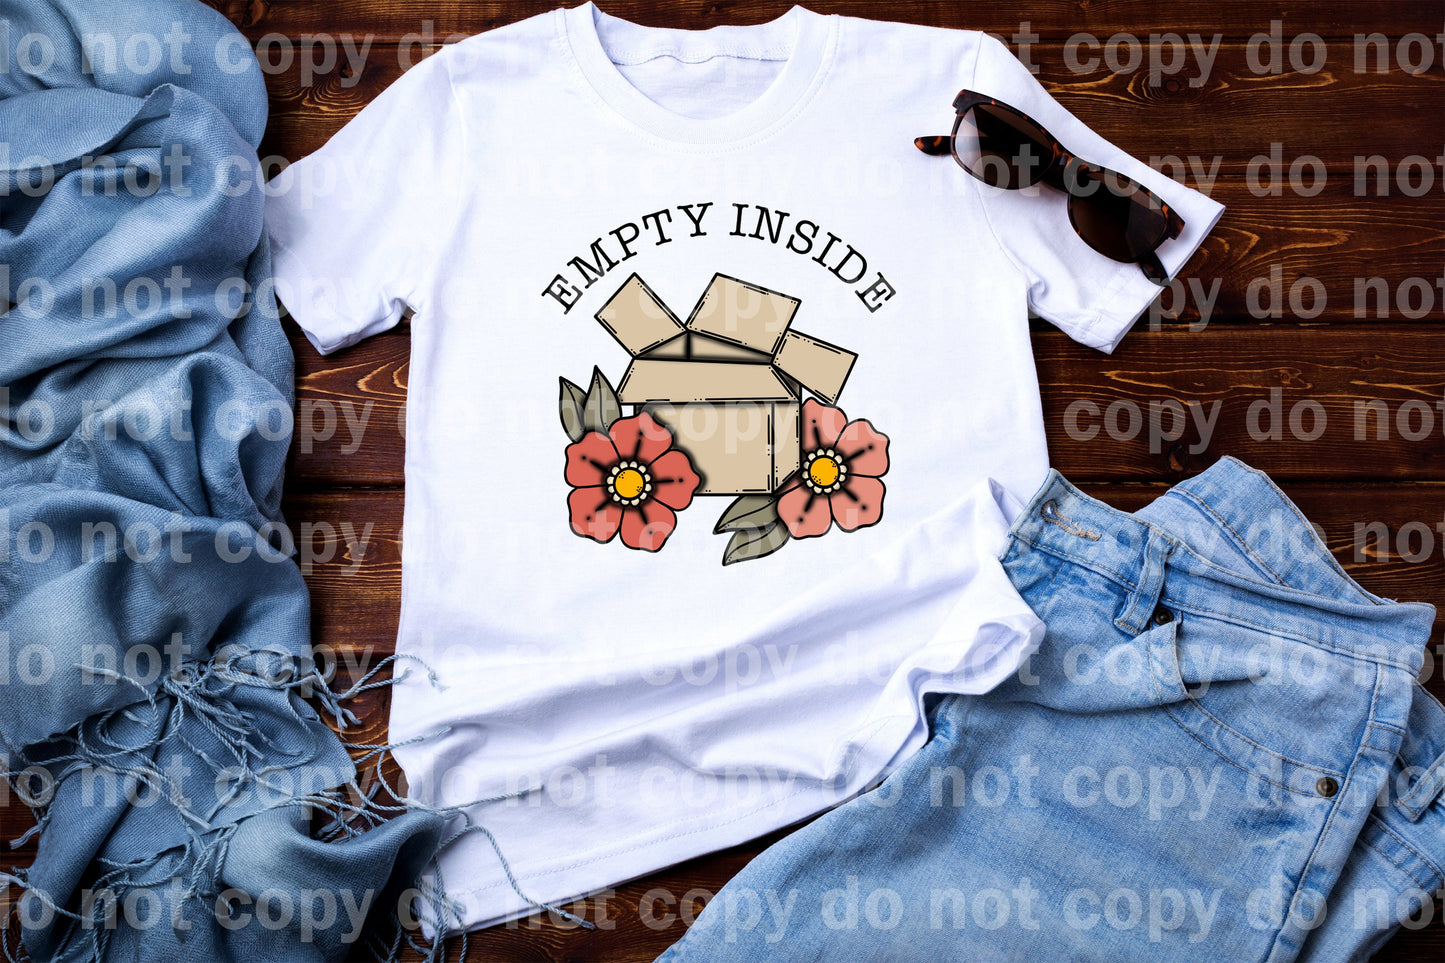 Empty Inside Full Color/One Color Dream Print or Sublimation Print